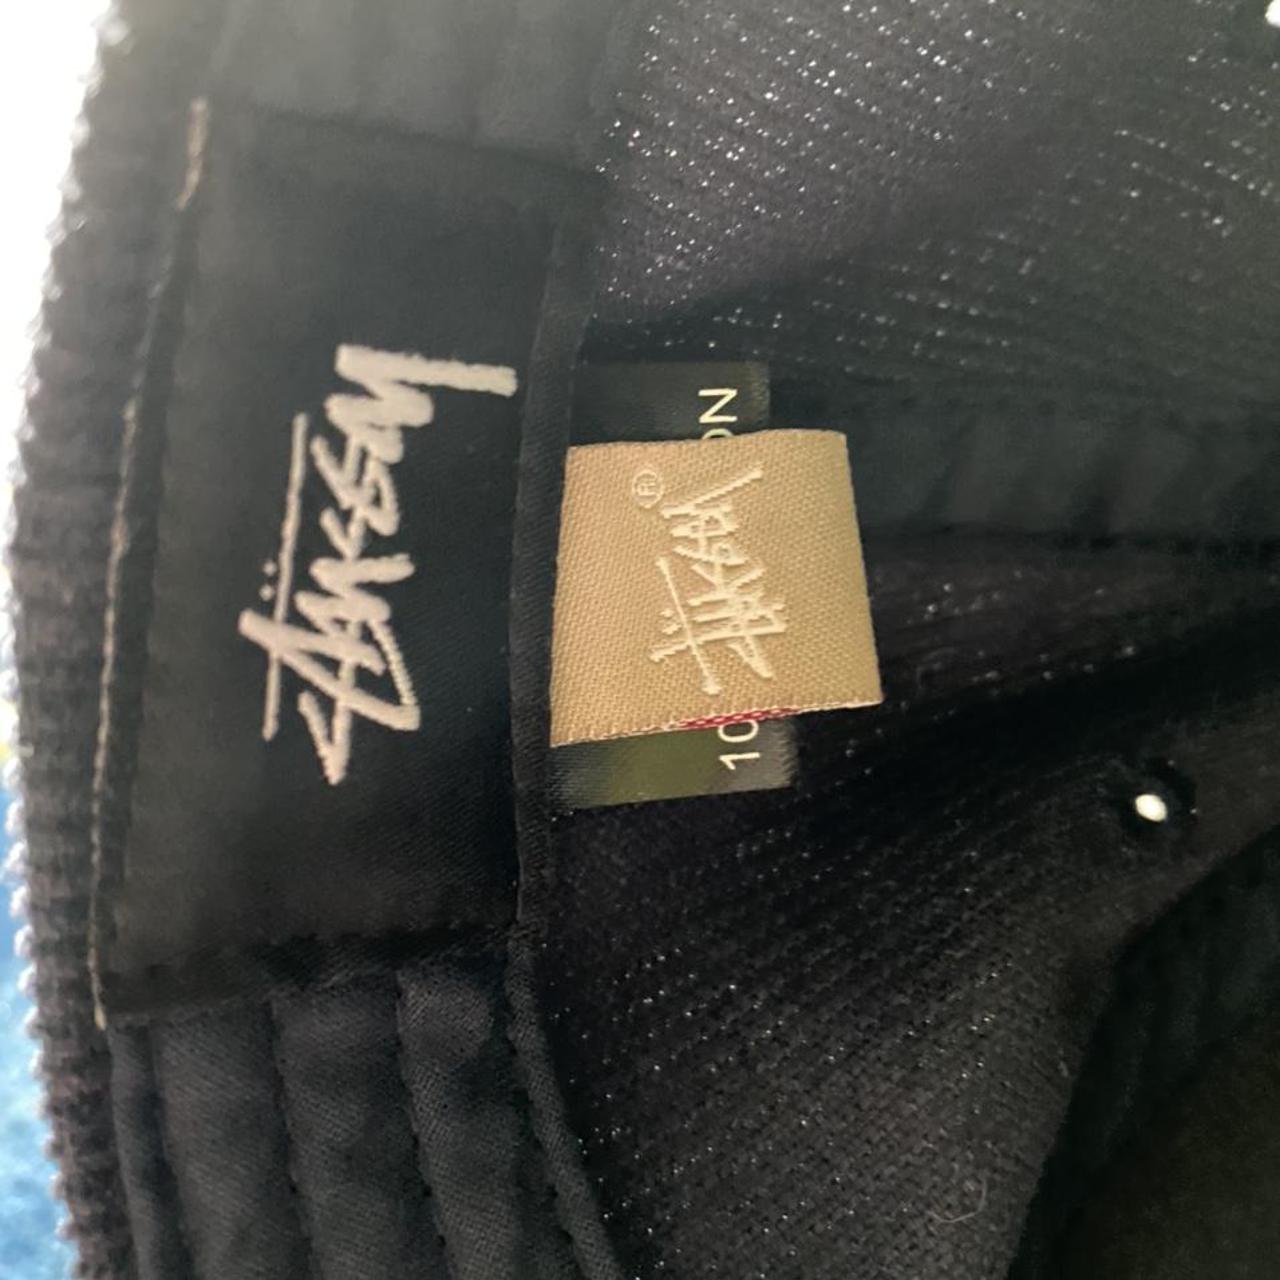 Product Image 3 - Cordial Stüssy hat readjusted size